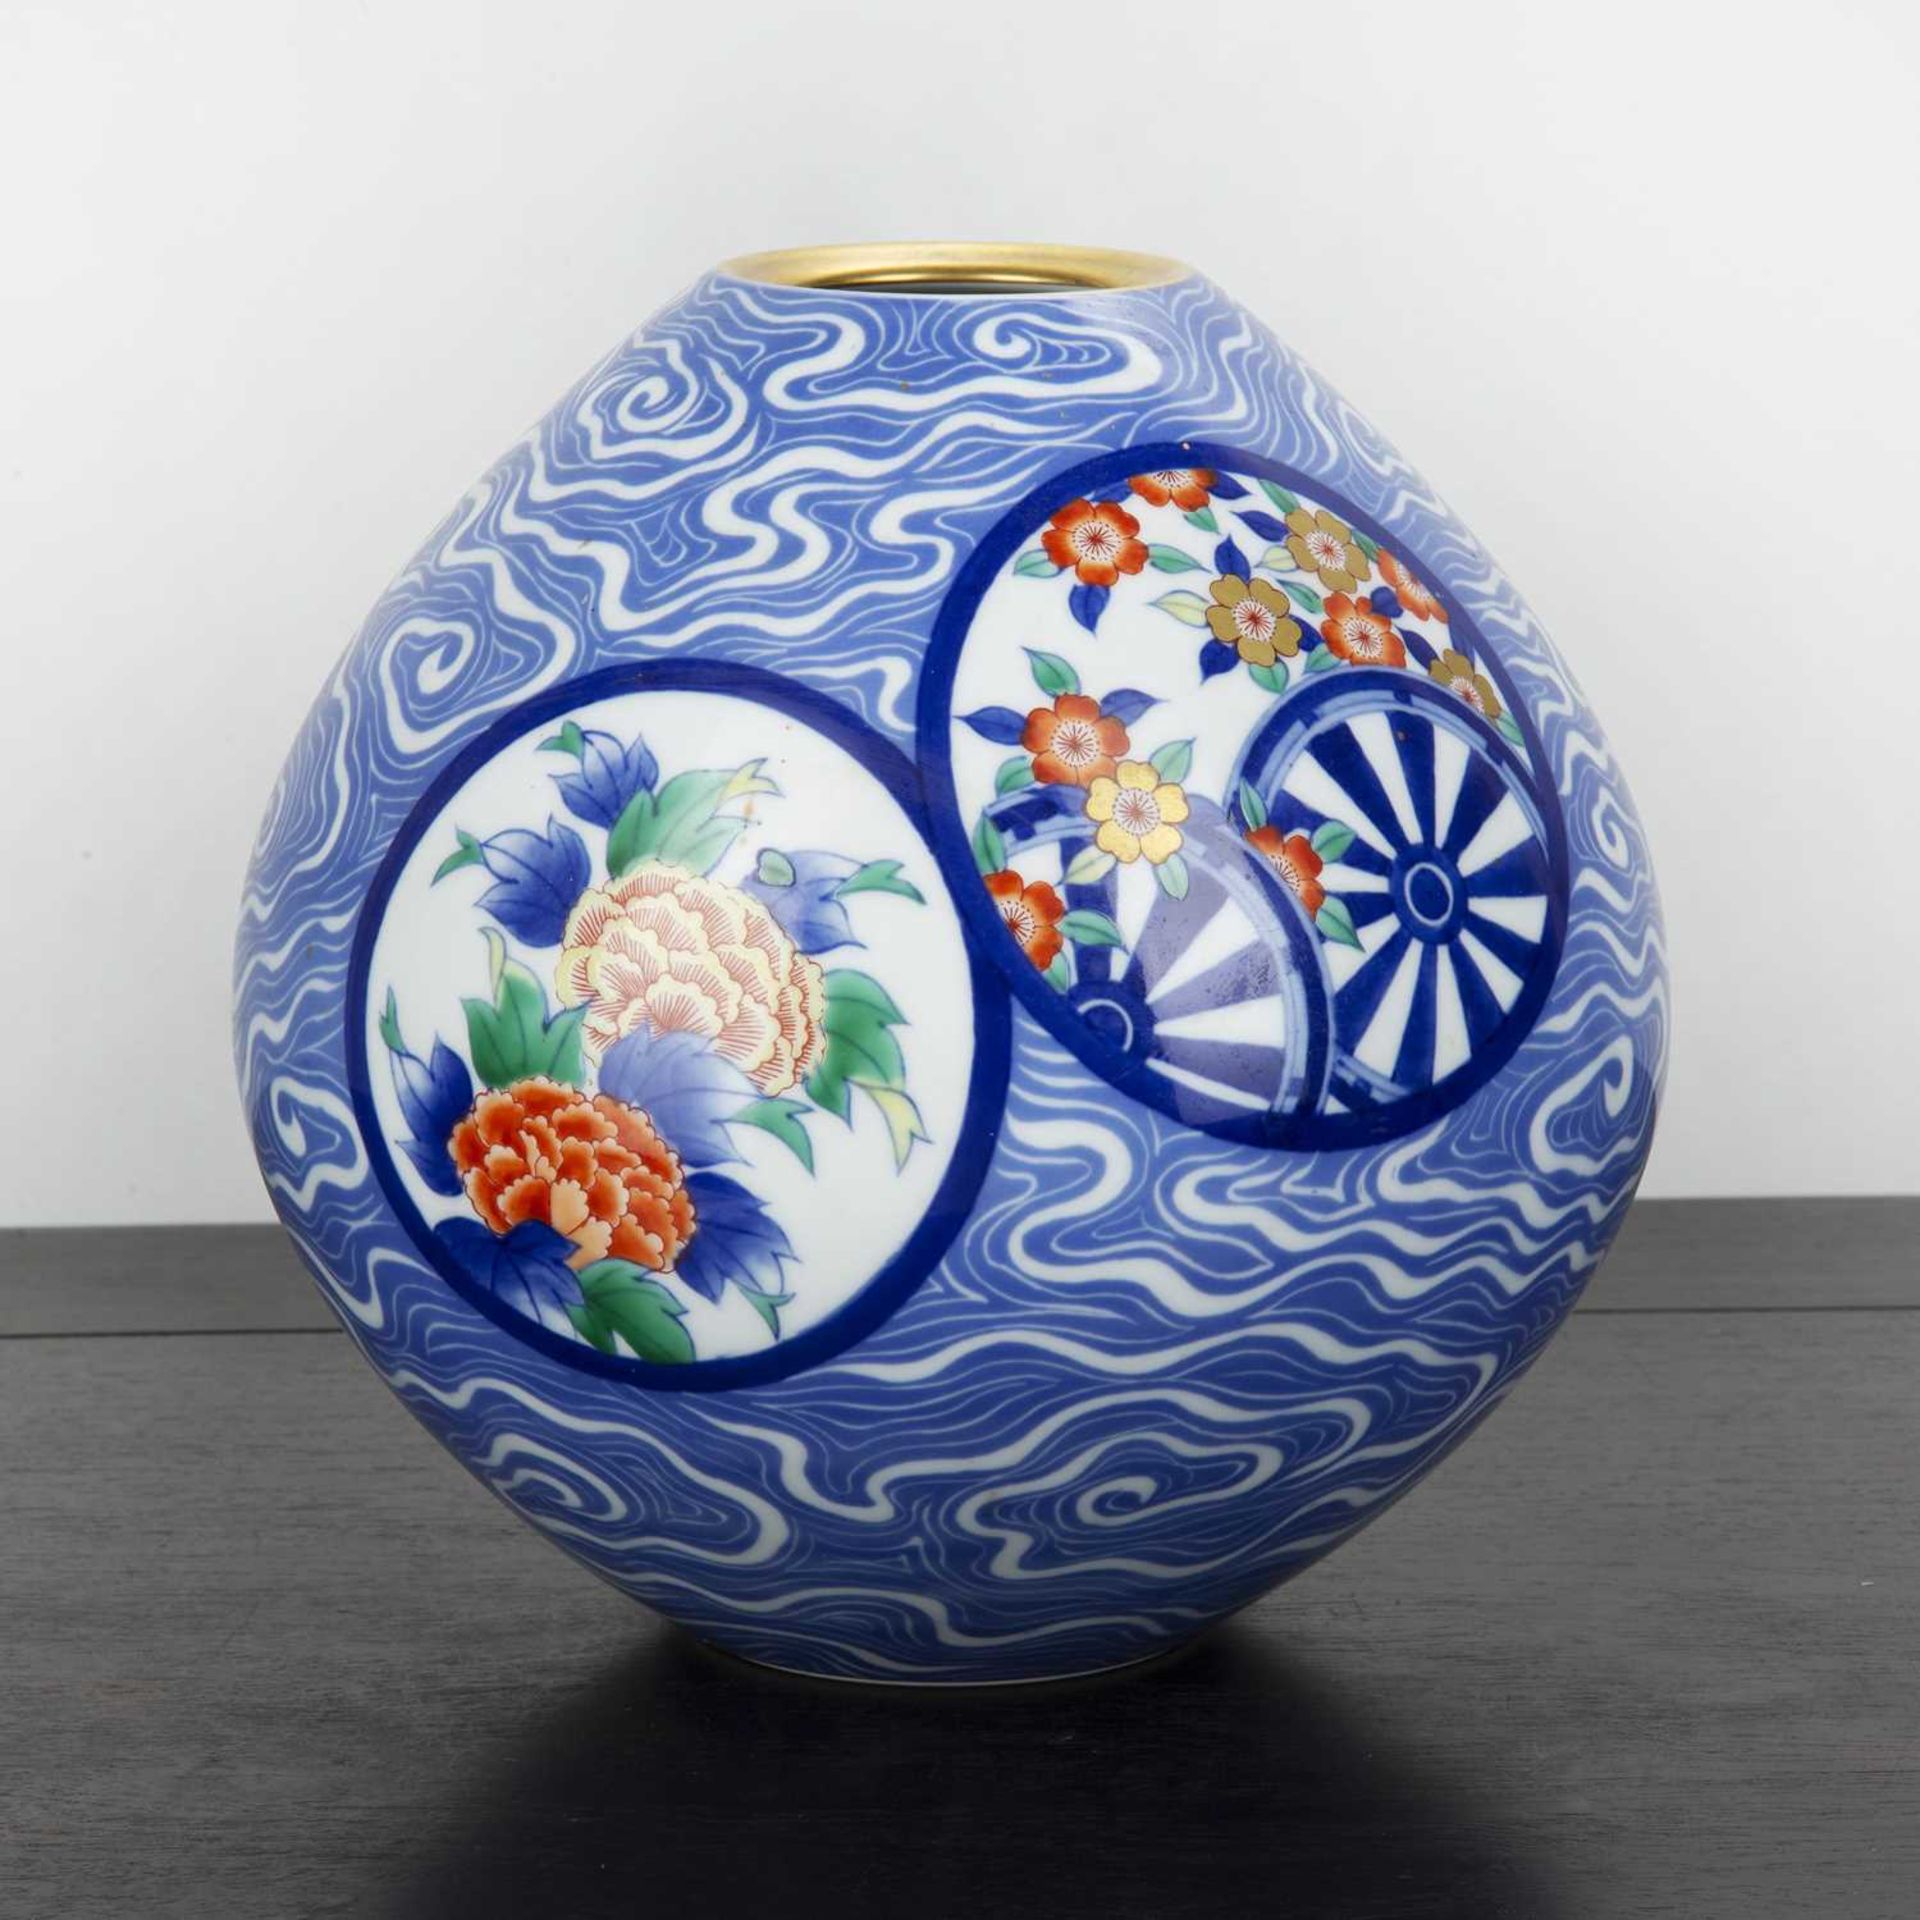 Fukagawa vase Japanese, 20th Century decorated with circular panels depicting flowers, with a blue